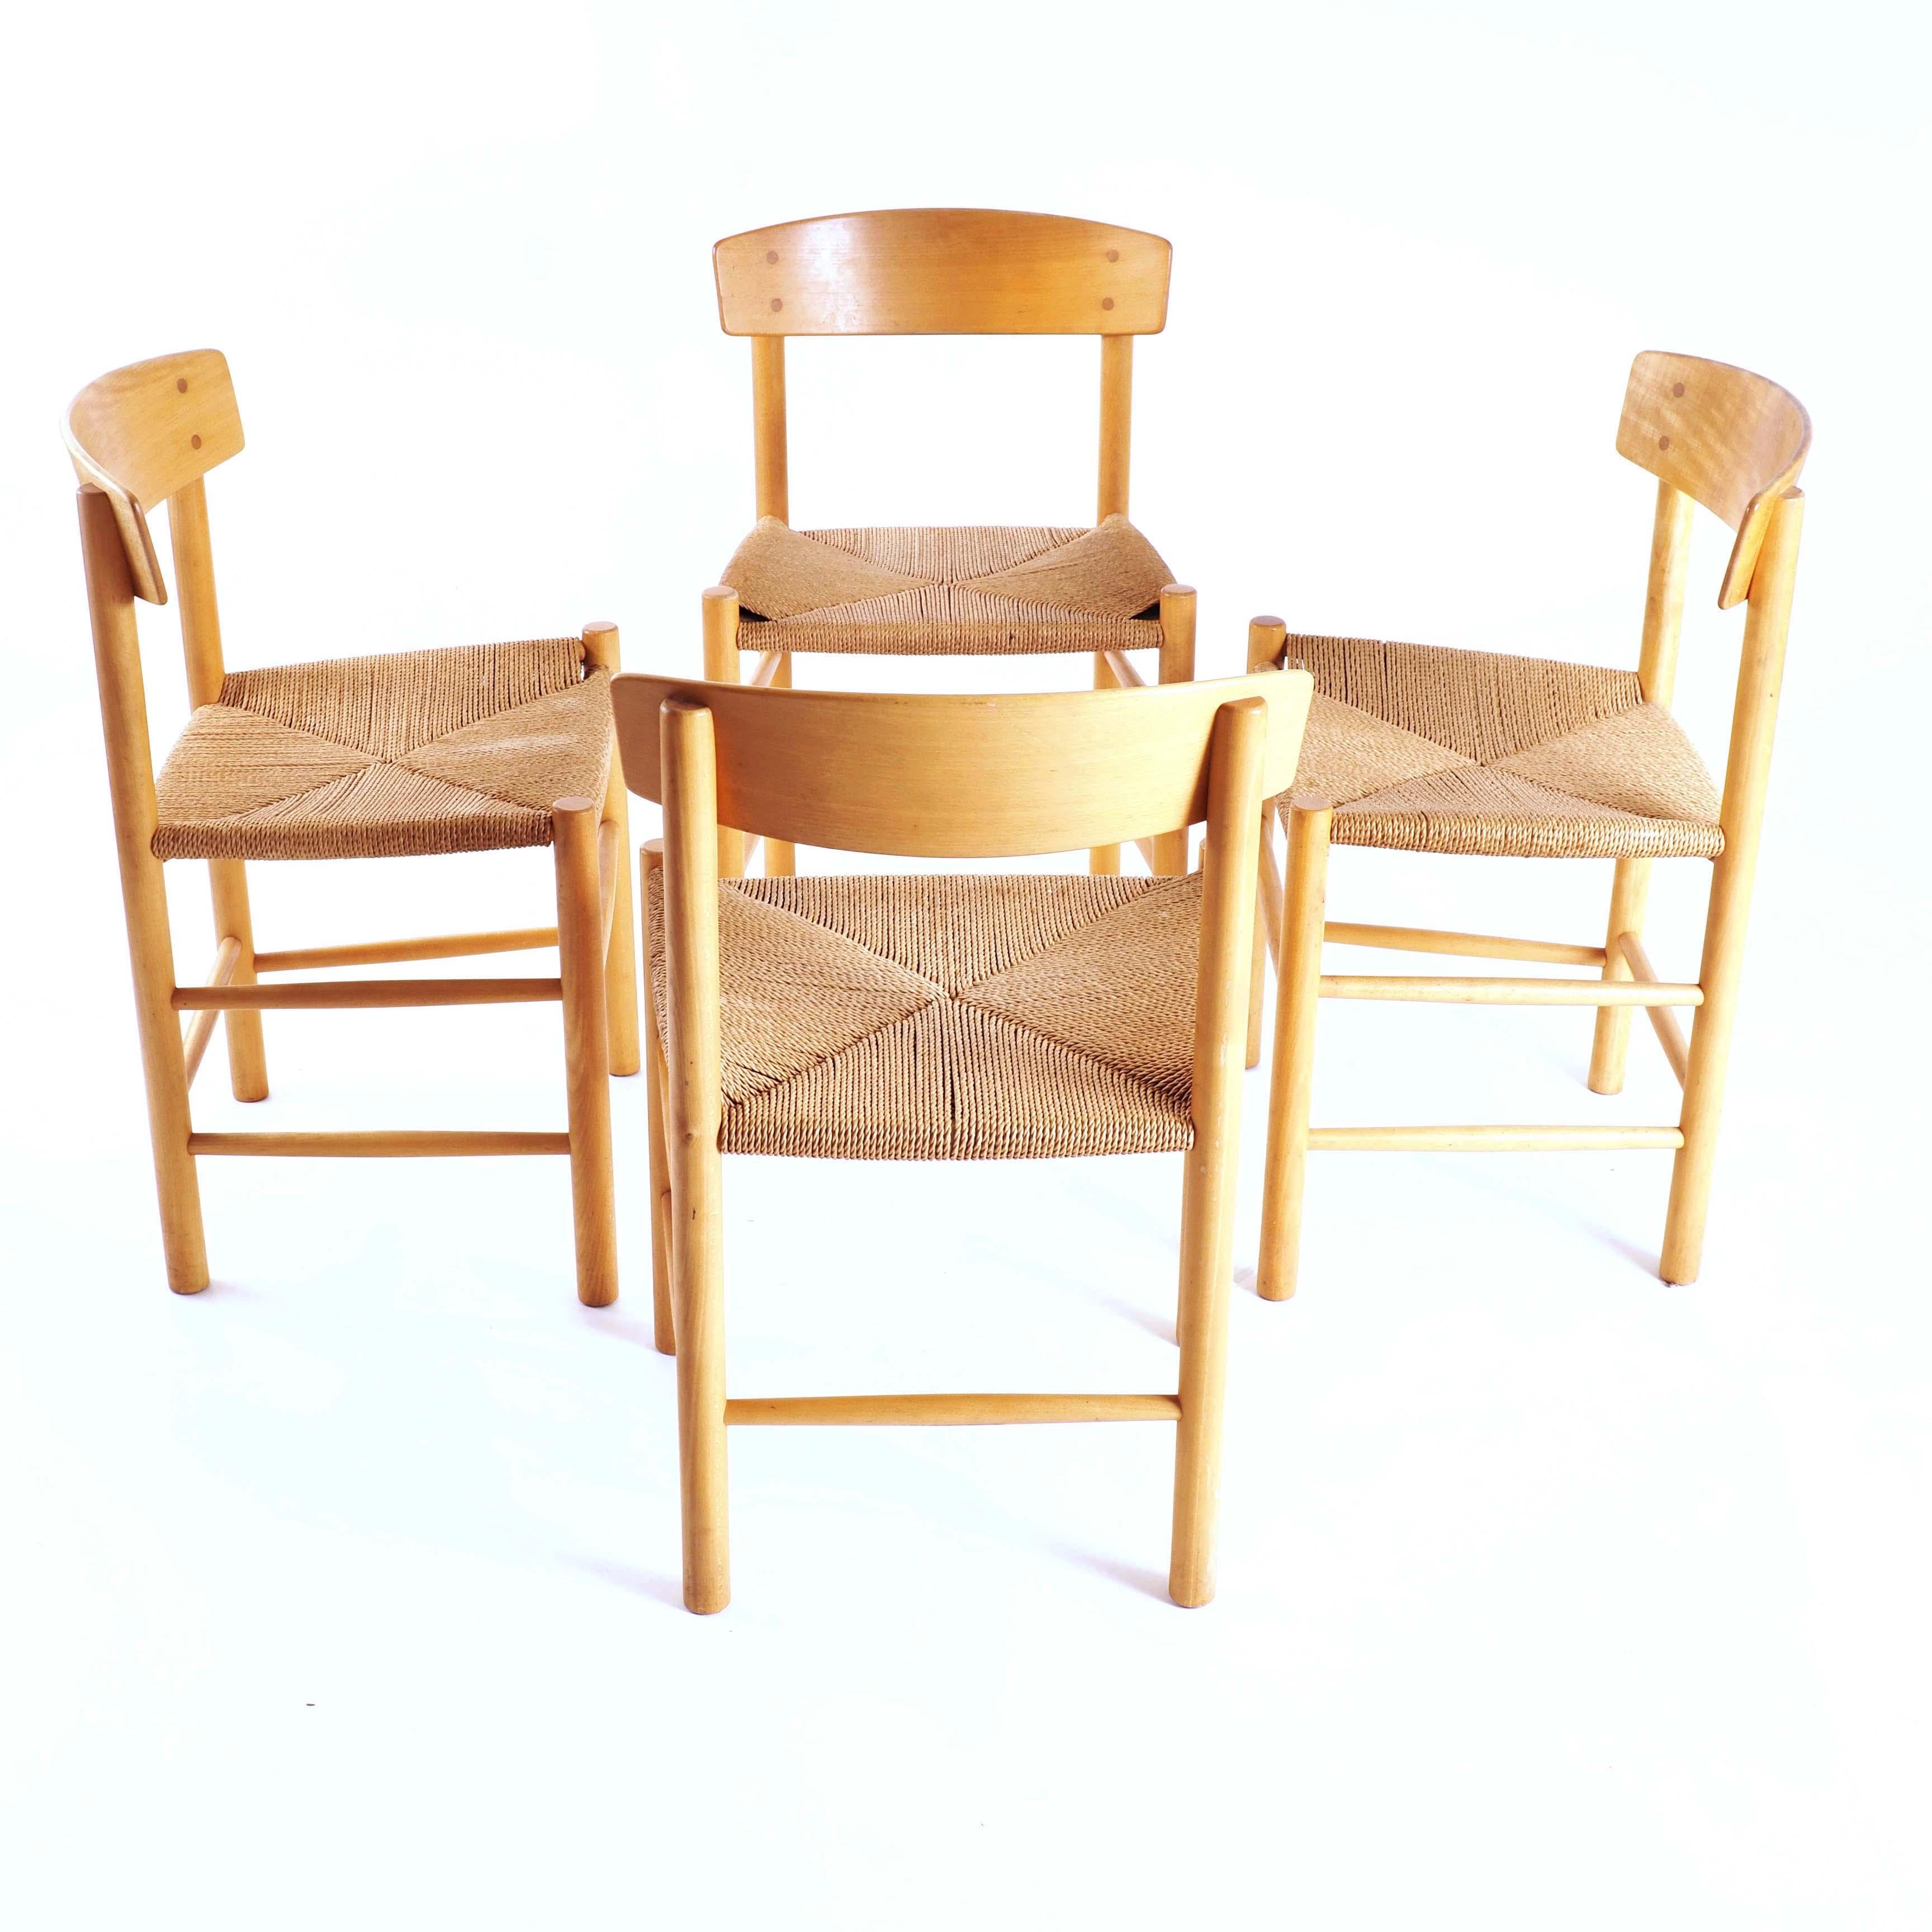 Six J39 chairs in beech and papercord by Børge Mogensen. This chair was designed for the FDB, the Danish Cooperative, in 1947. The seat is hand woven of 133 meters of papercord.